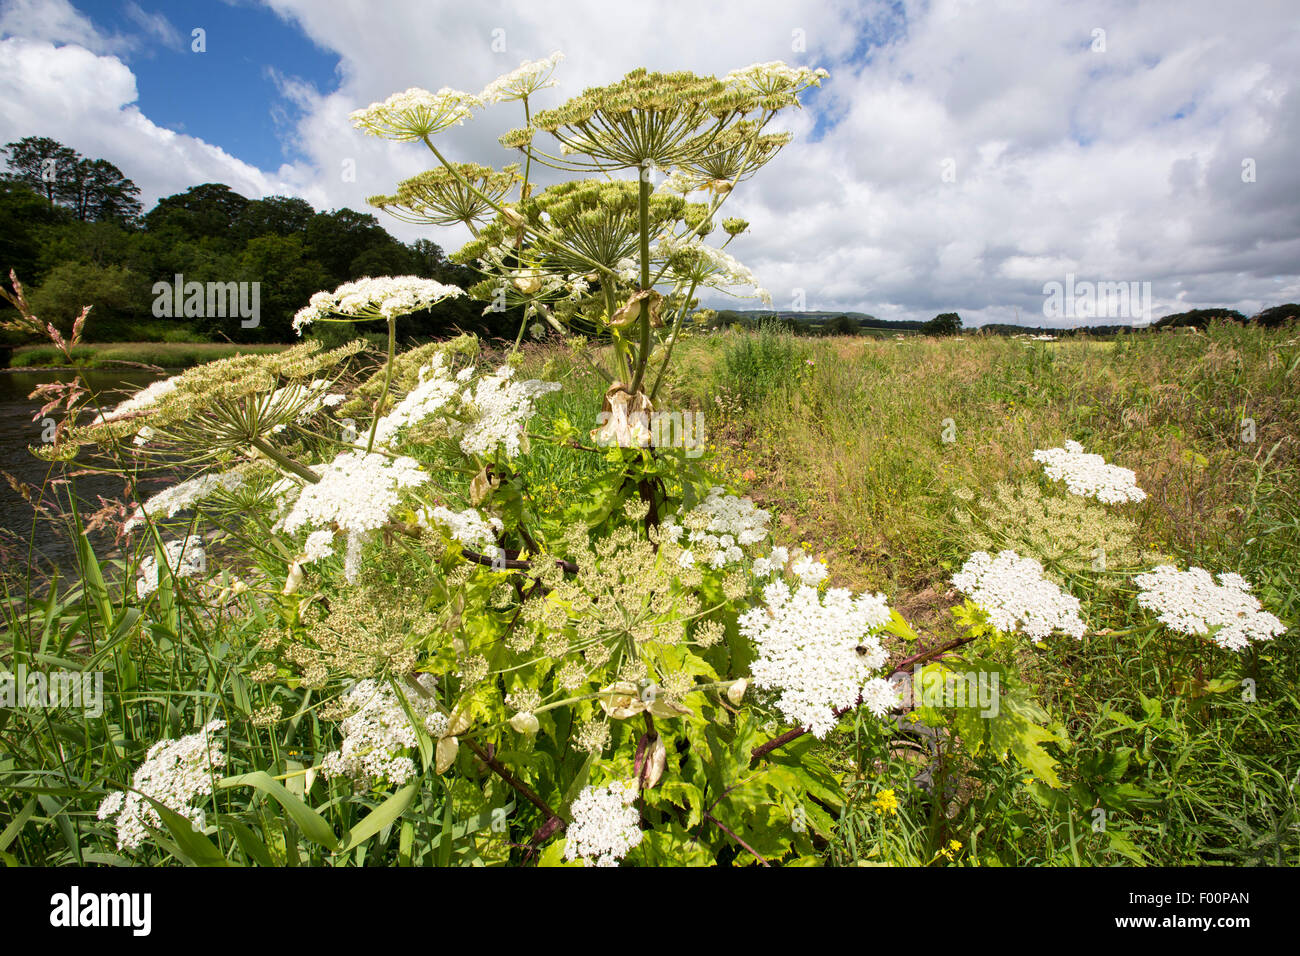 A Giant Hogweed, Heracleum mantegazzianum, an invasive toxic plant, on the banks of the River Ribble near Clitheroe, Lancashire, UK, Stock Photo